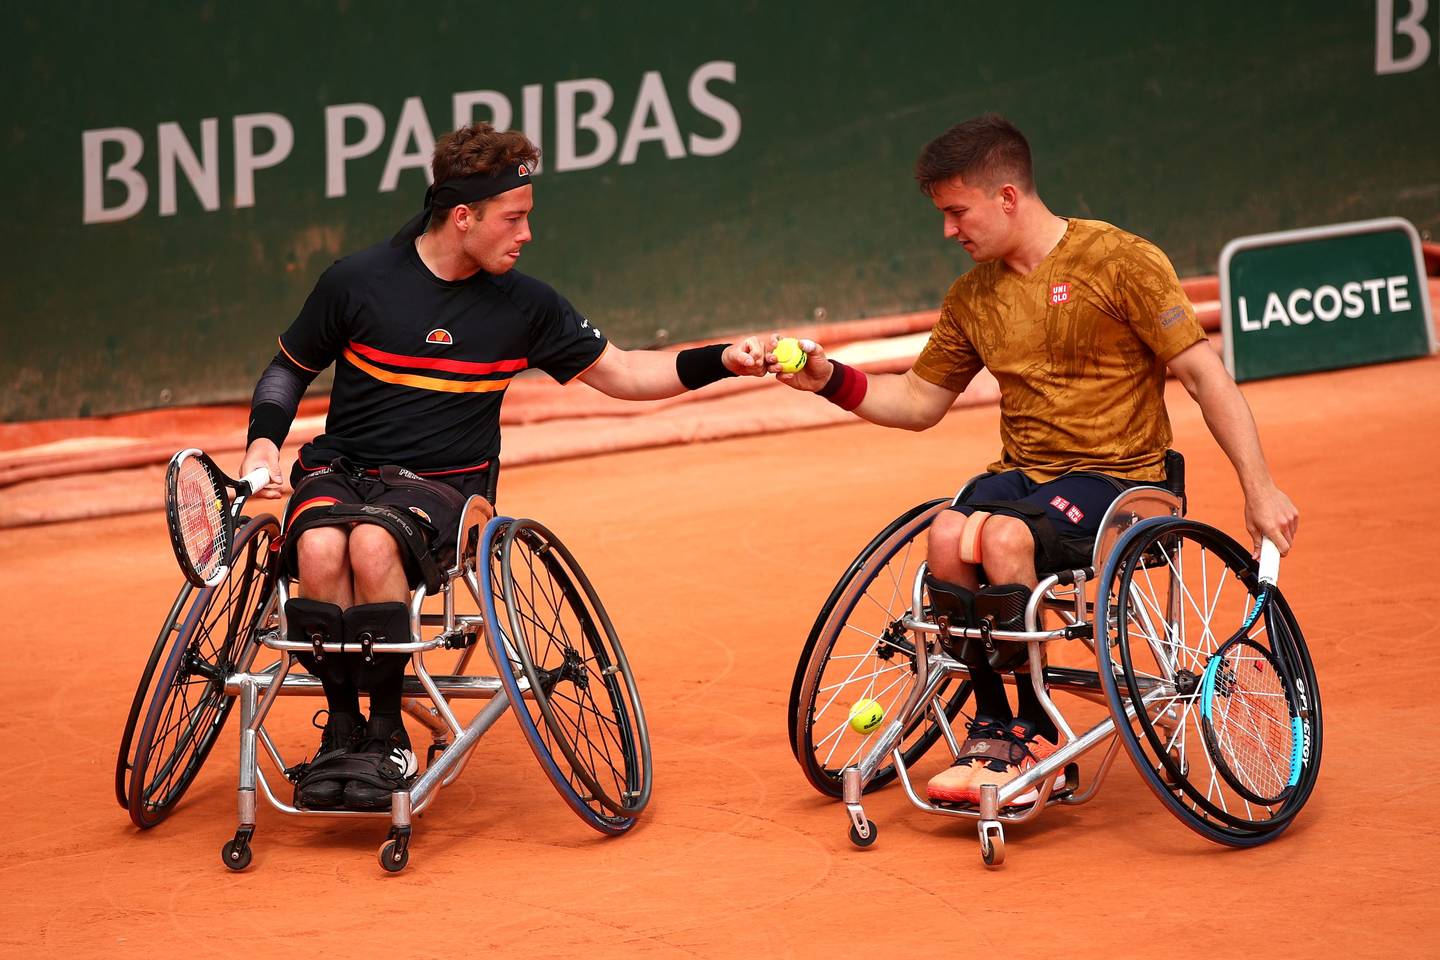 Alfie Hewett and Gordon Reid completing career Grand Slam of men’s doubles titles when they won their first French Open title together at Roland Garros.